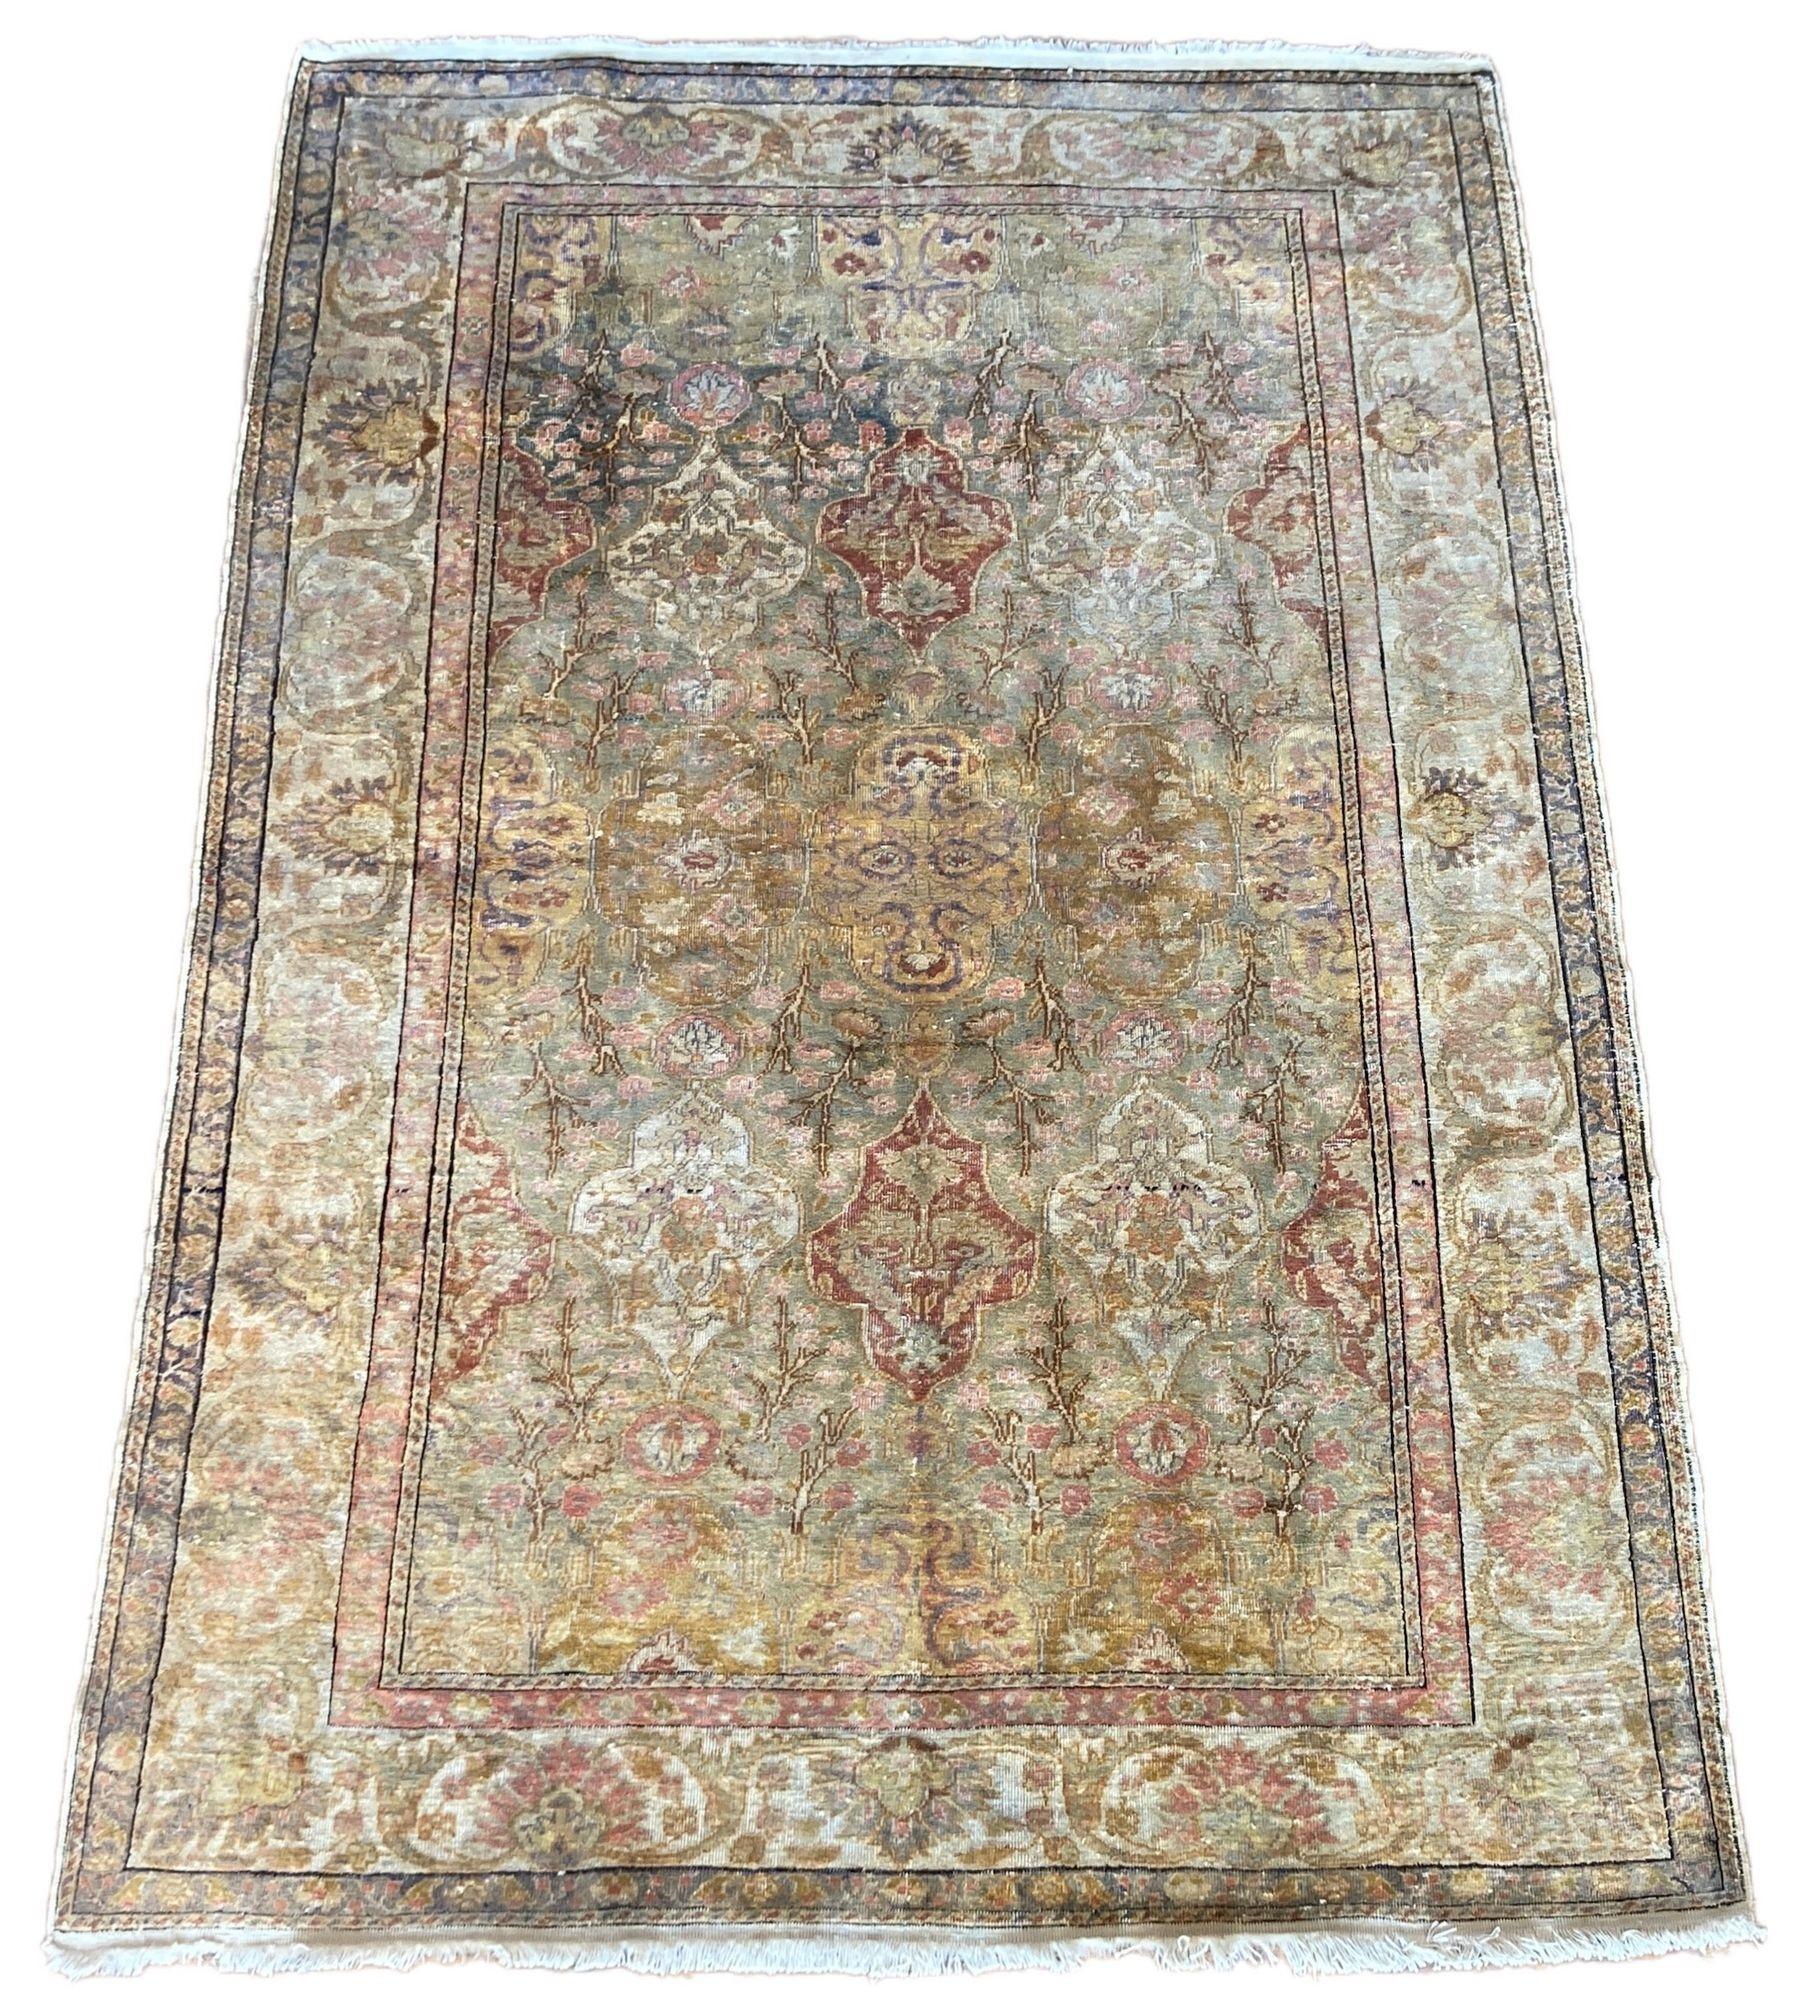 A fabulous vintage silk rug, hand woven in Kayseri, central Turkey circa 1960 with an allover shield design in soft pastel tones. Very finely woven in silk on a cotton foundation.
Size: 1.65m x 1.16m (5ft 5in x 3ft 10in)
This rug is in good